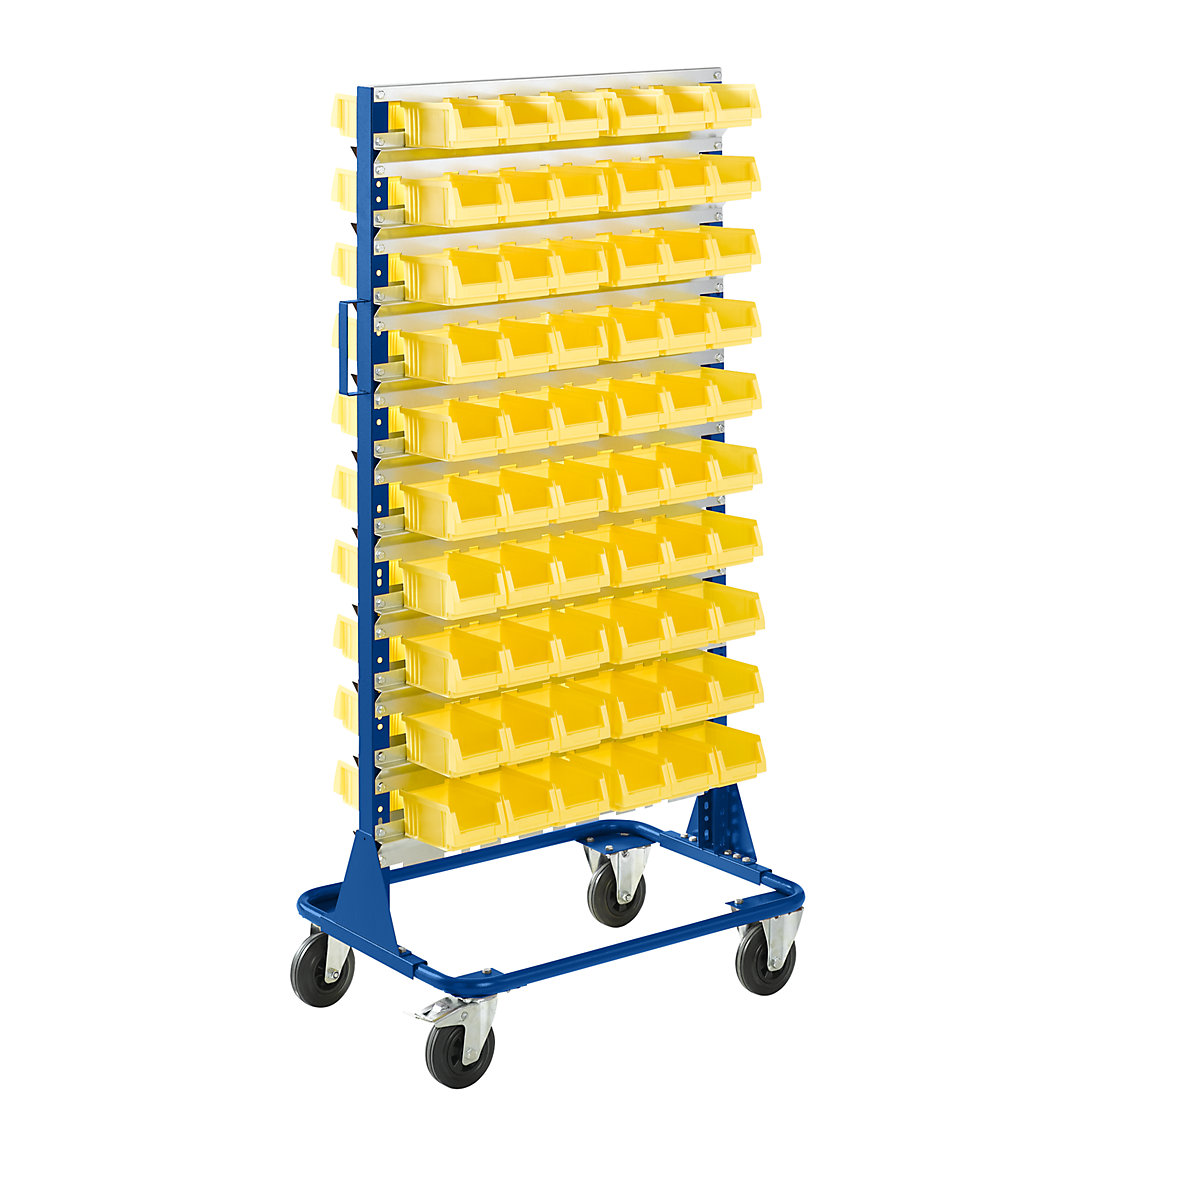 Mobile rack, height 1588 mm, mobile rack with 120 open fronted storage bins, gentian blue-6